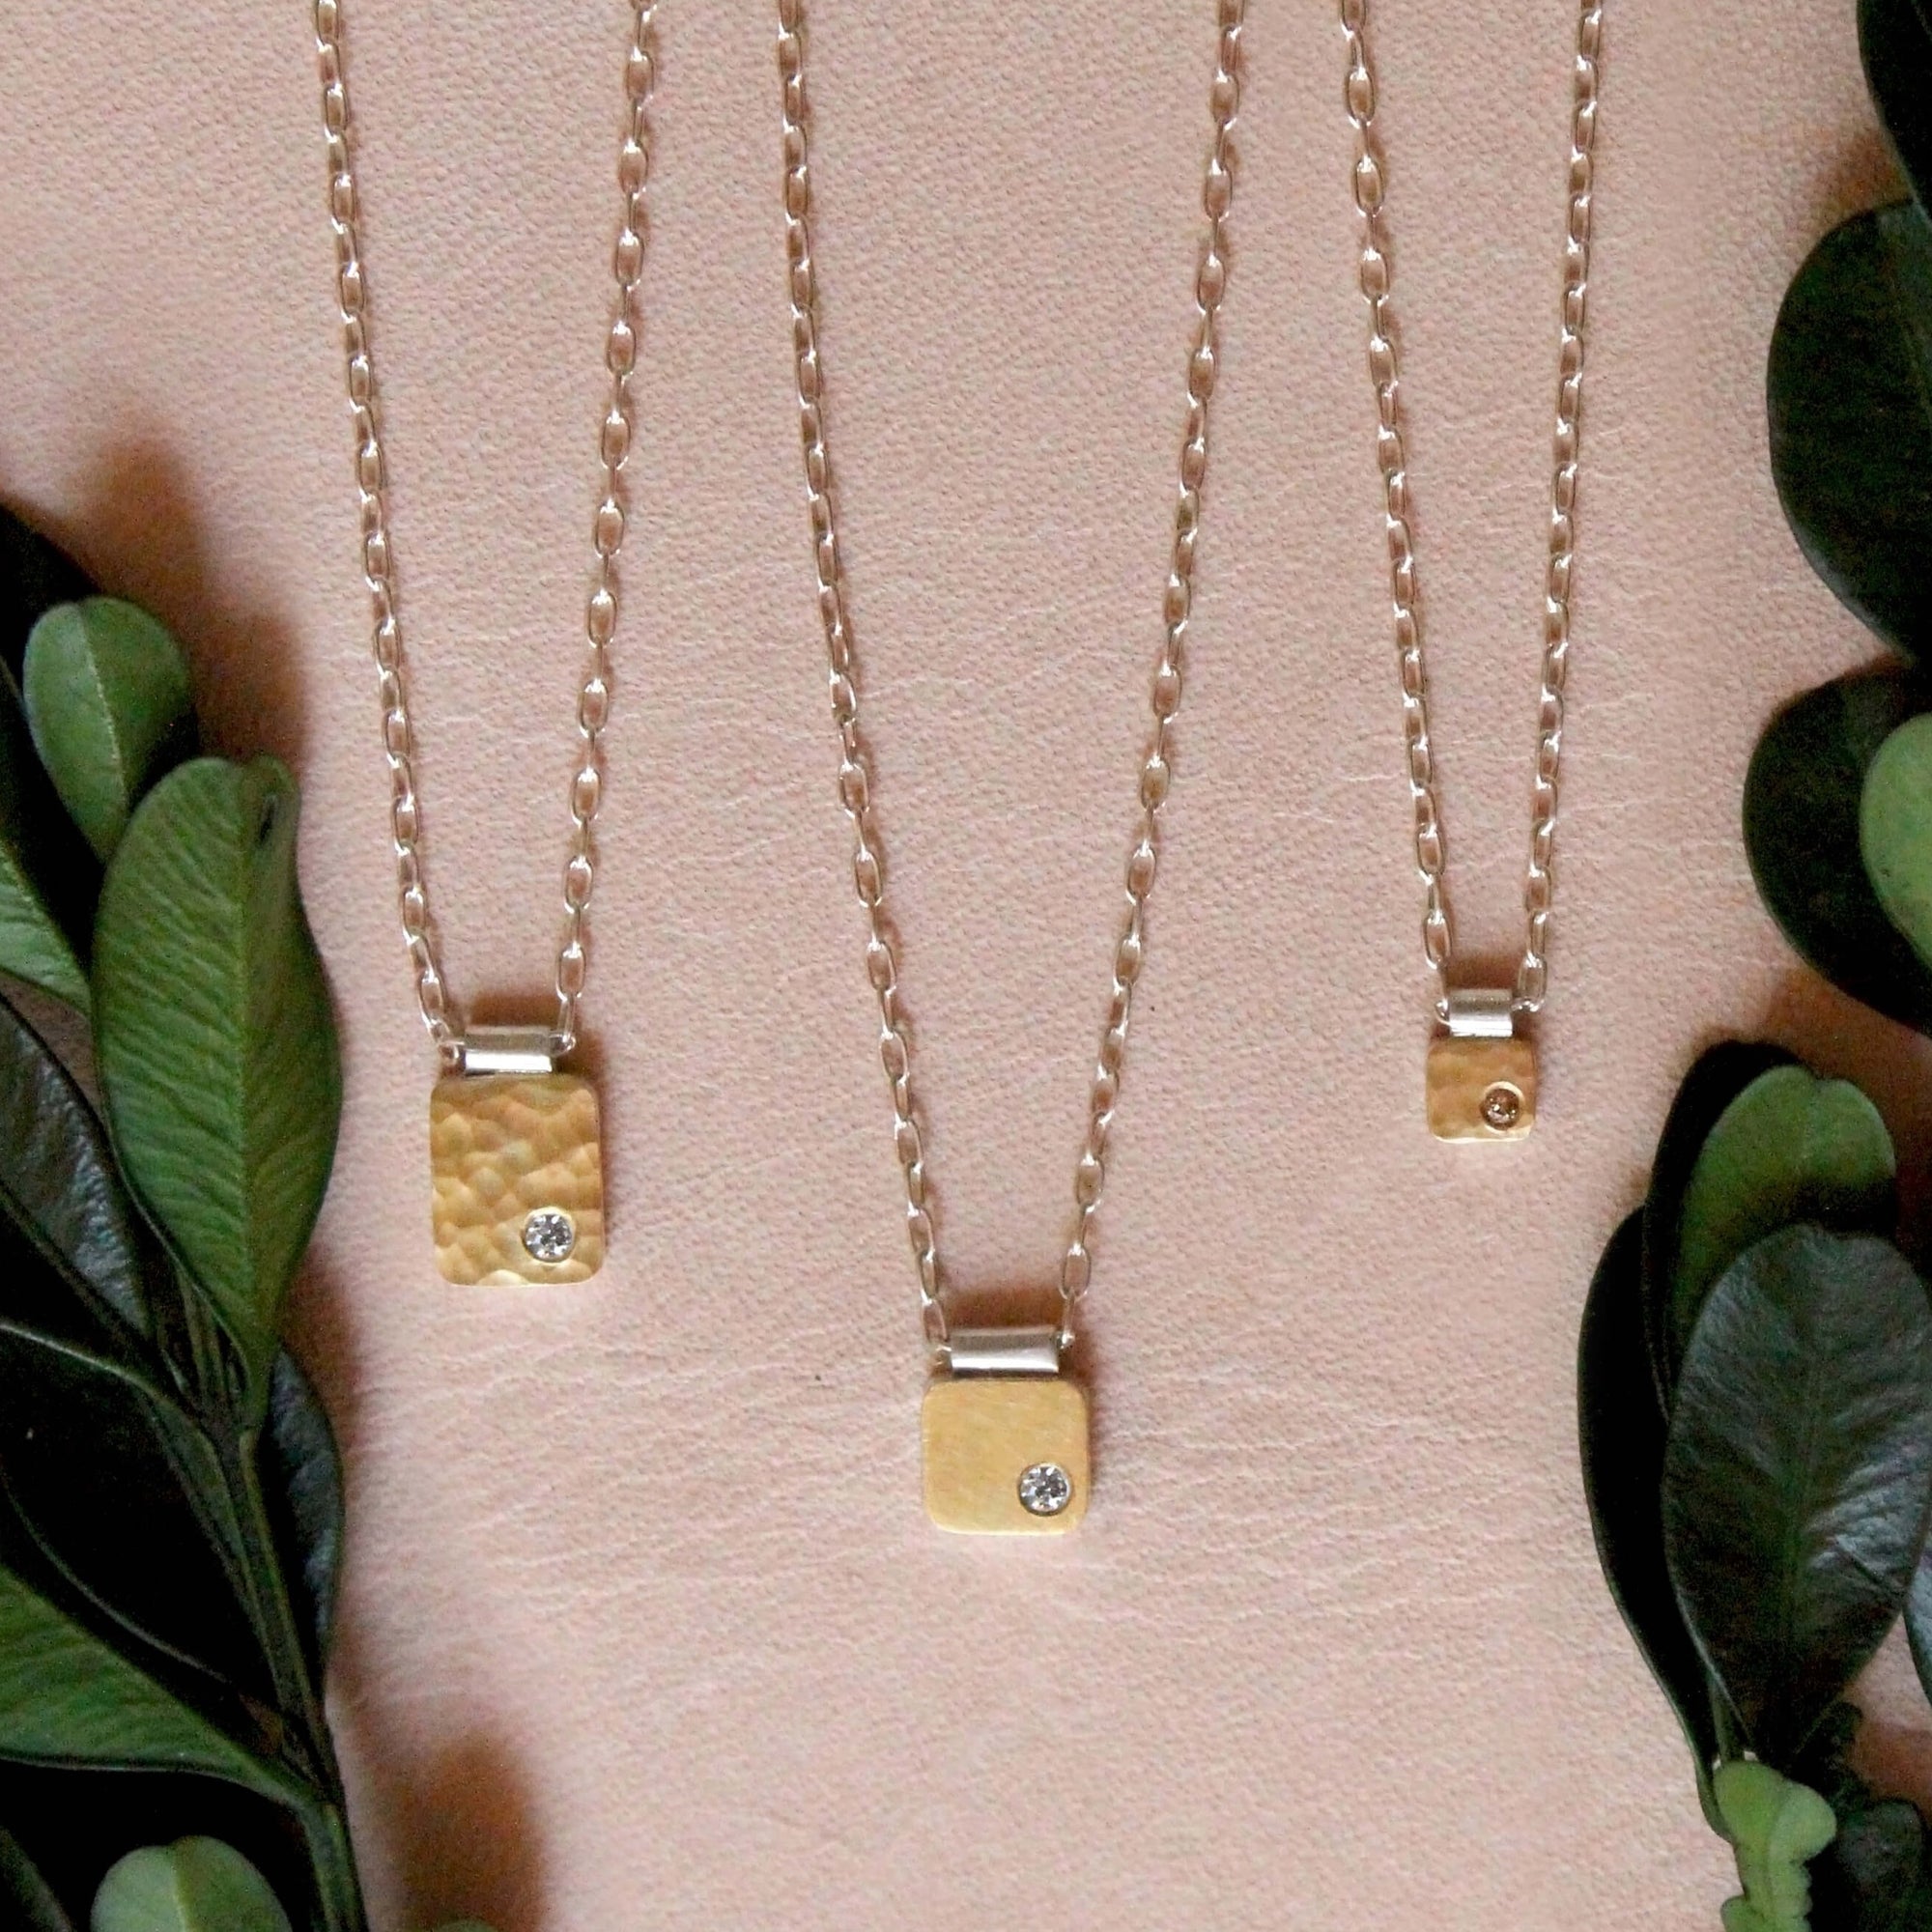 Hammered yellow gold and white diamond rectangle cell pendant. Handmade by EC Design Jewelry using recycled metal and conflict-free stone.